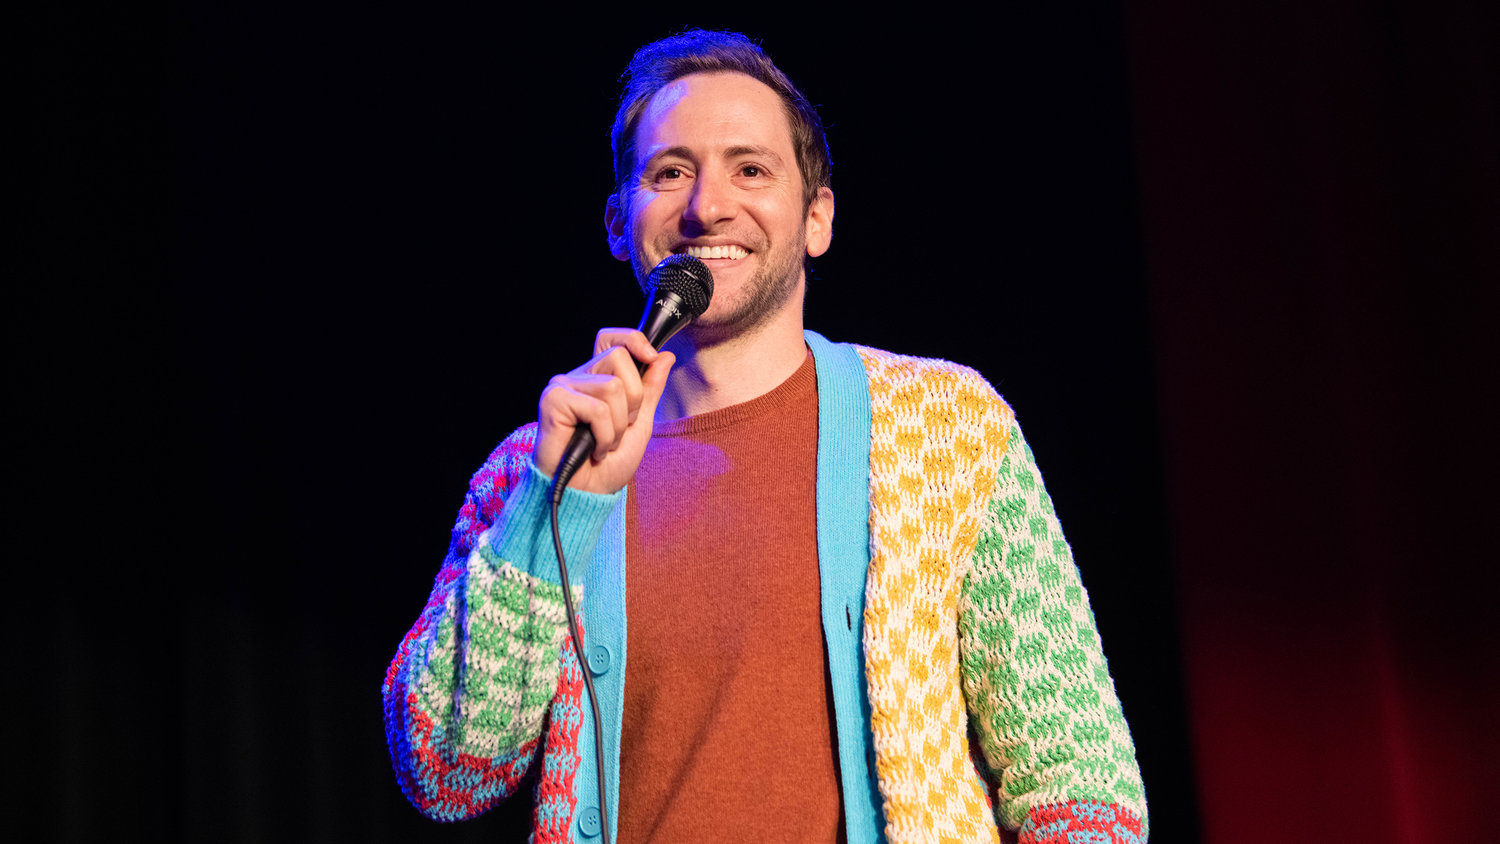 Samuel J. Comroe smiles while performing a sold out comedy show Friday night at the McFiler’s Chehalis Theater during his “Come Get These Giggles,” tour across the United States.